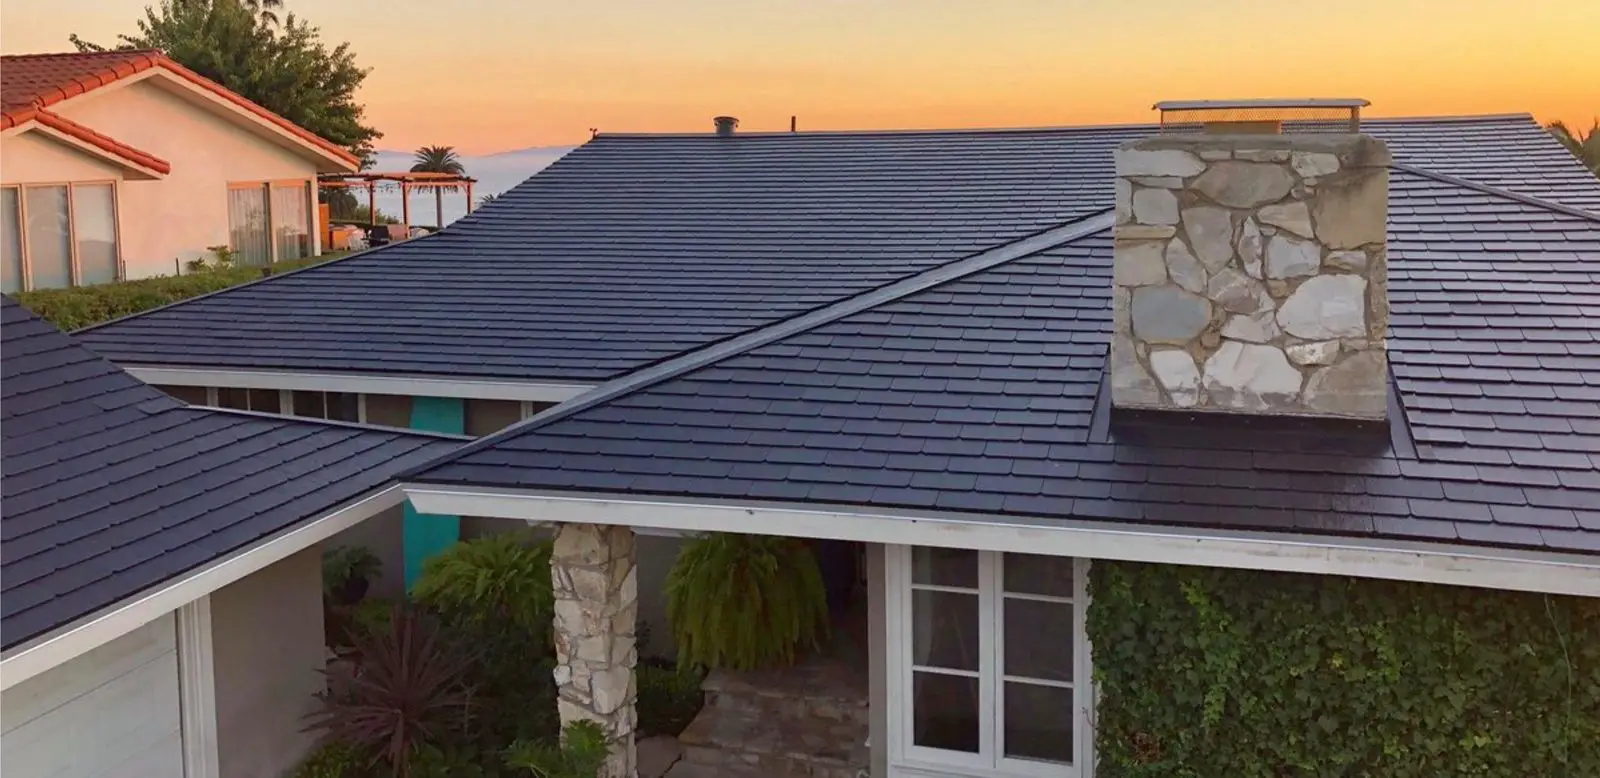 Tesla Latest Solar Roof Patent Which Will Benefit ...